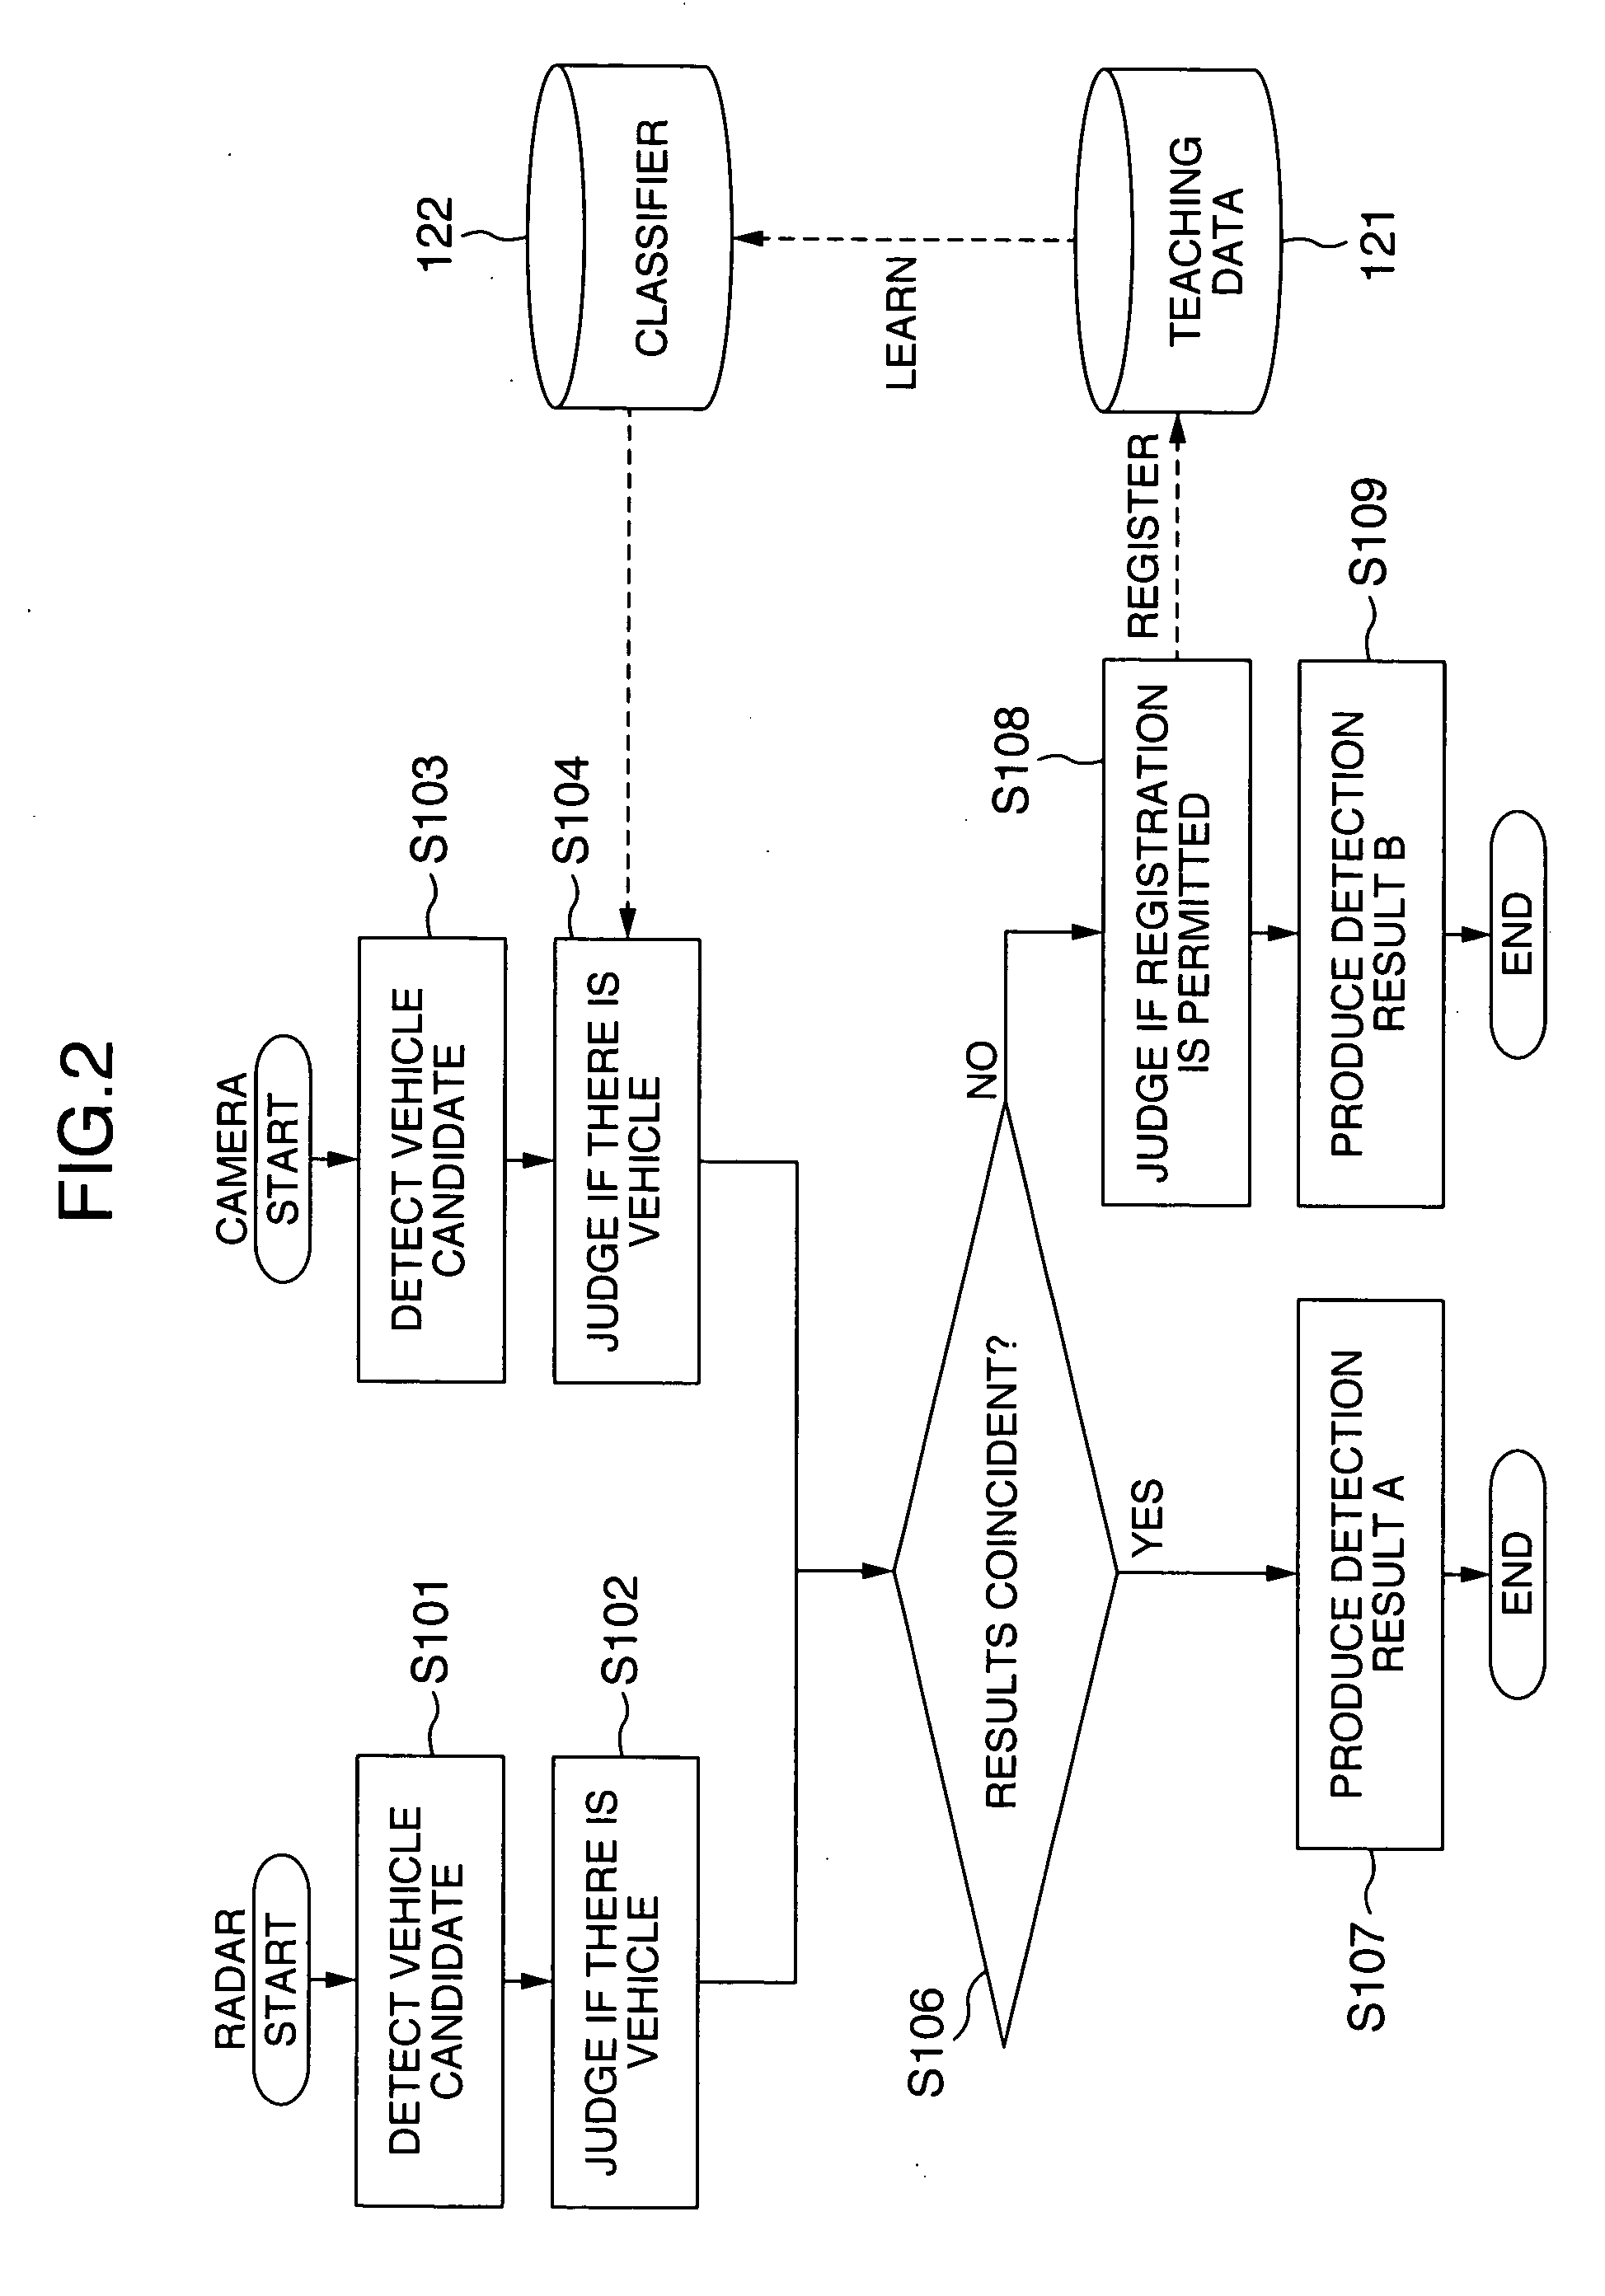 Apparatus and method for detecting vehicle